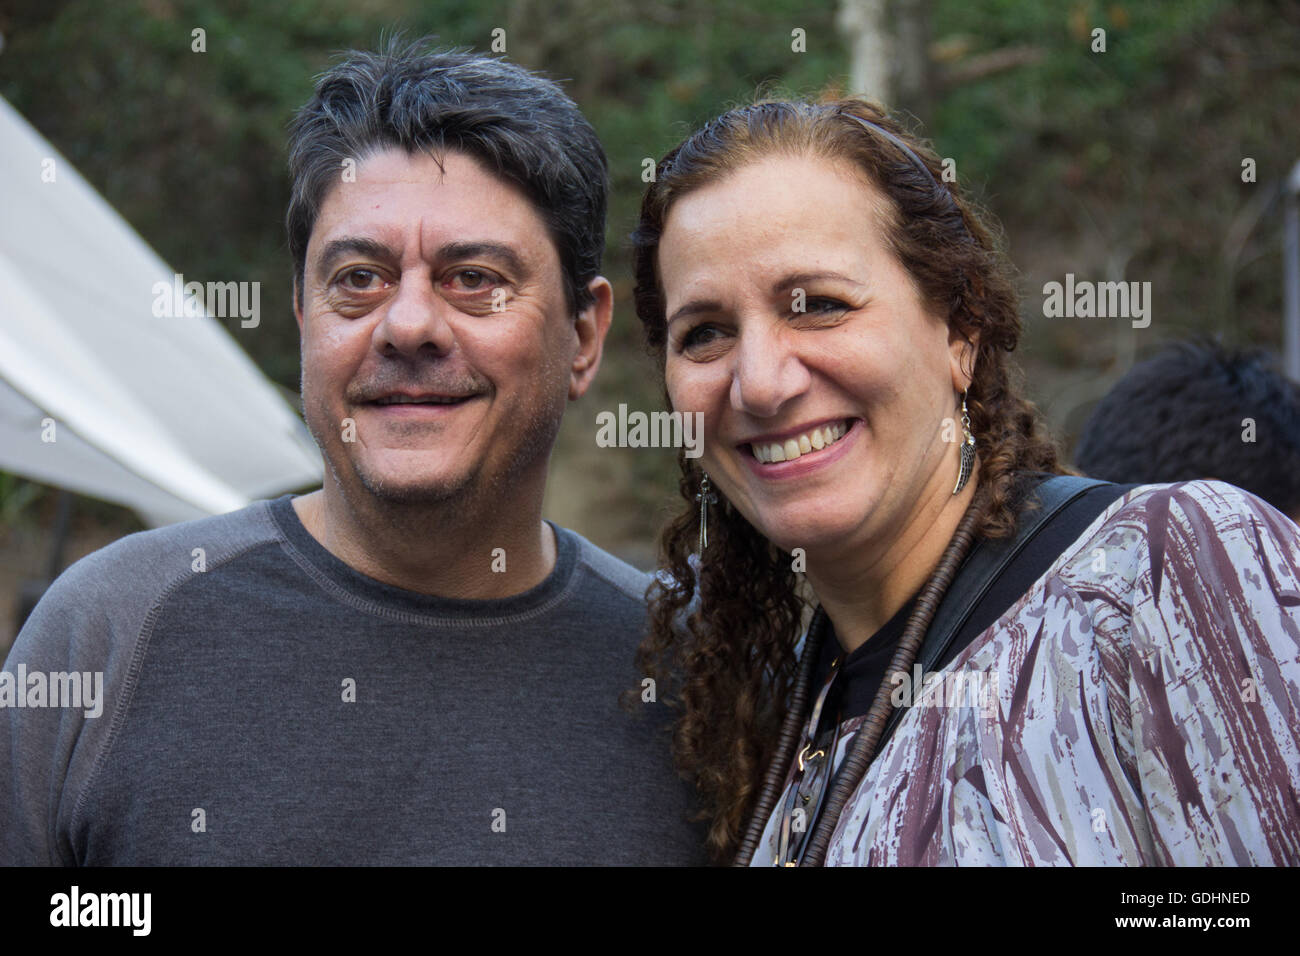 Wadih Damous, federal deputy for the PT-RJ, and Jandira Feghali, federal deputy for PCdoB-RJ, part act in Girl from Ipanema Park opposite the government of Michel Temer and favorable to the return of Dilma Rousseff. The act is part of activists Squat Minc and has artistic performances. Stock Photo